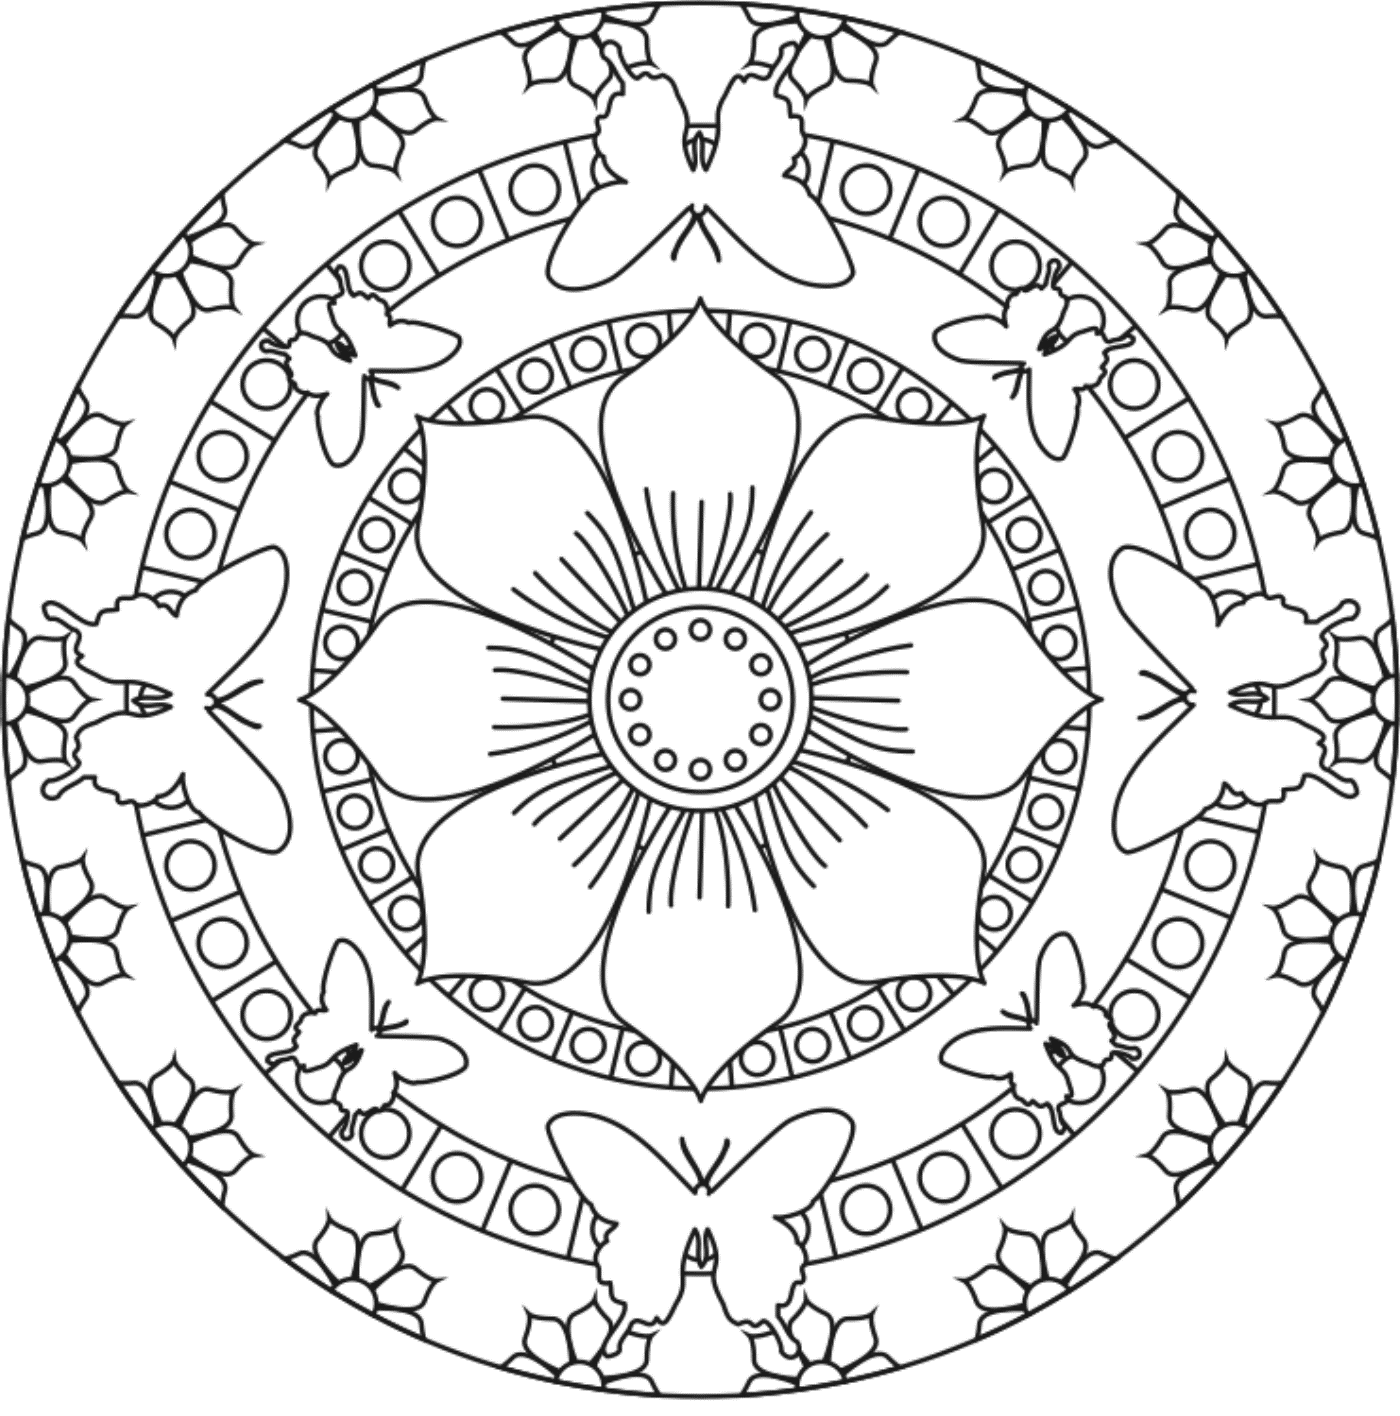 Simple mandala coloring pages download and print for free